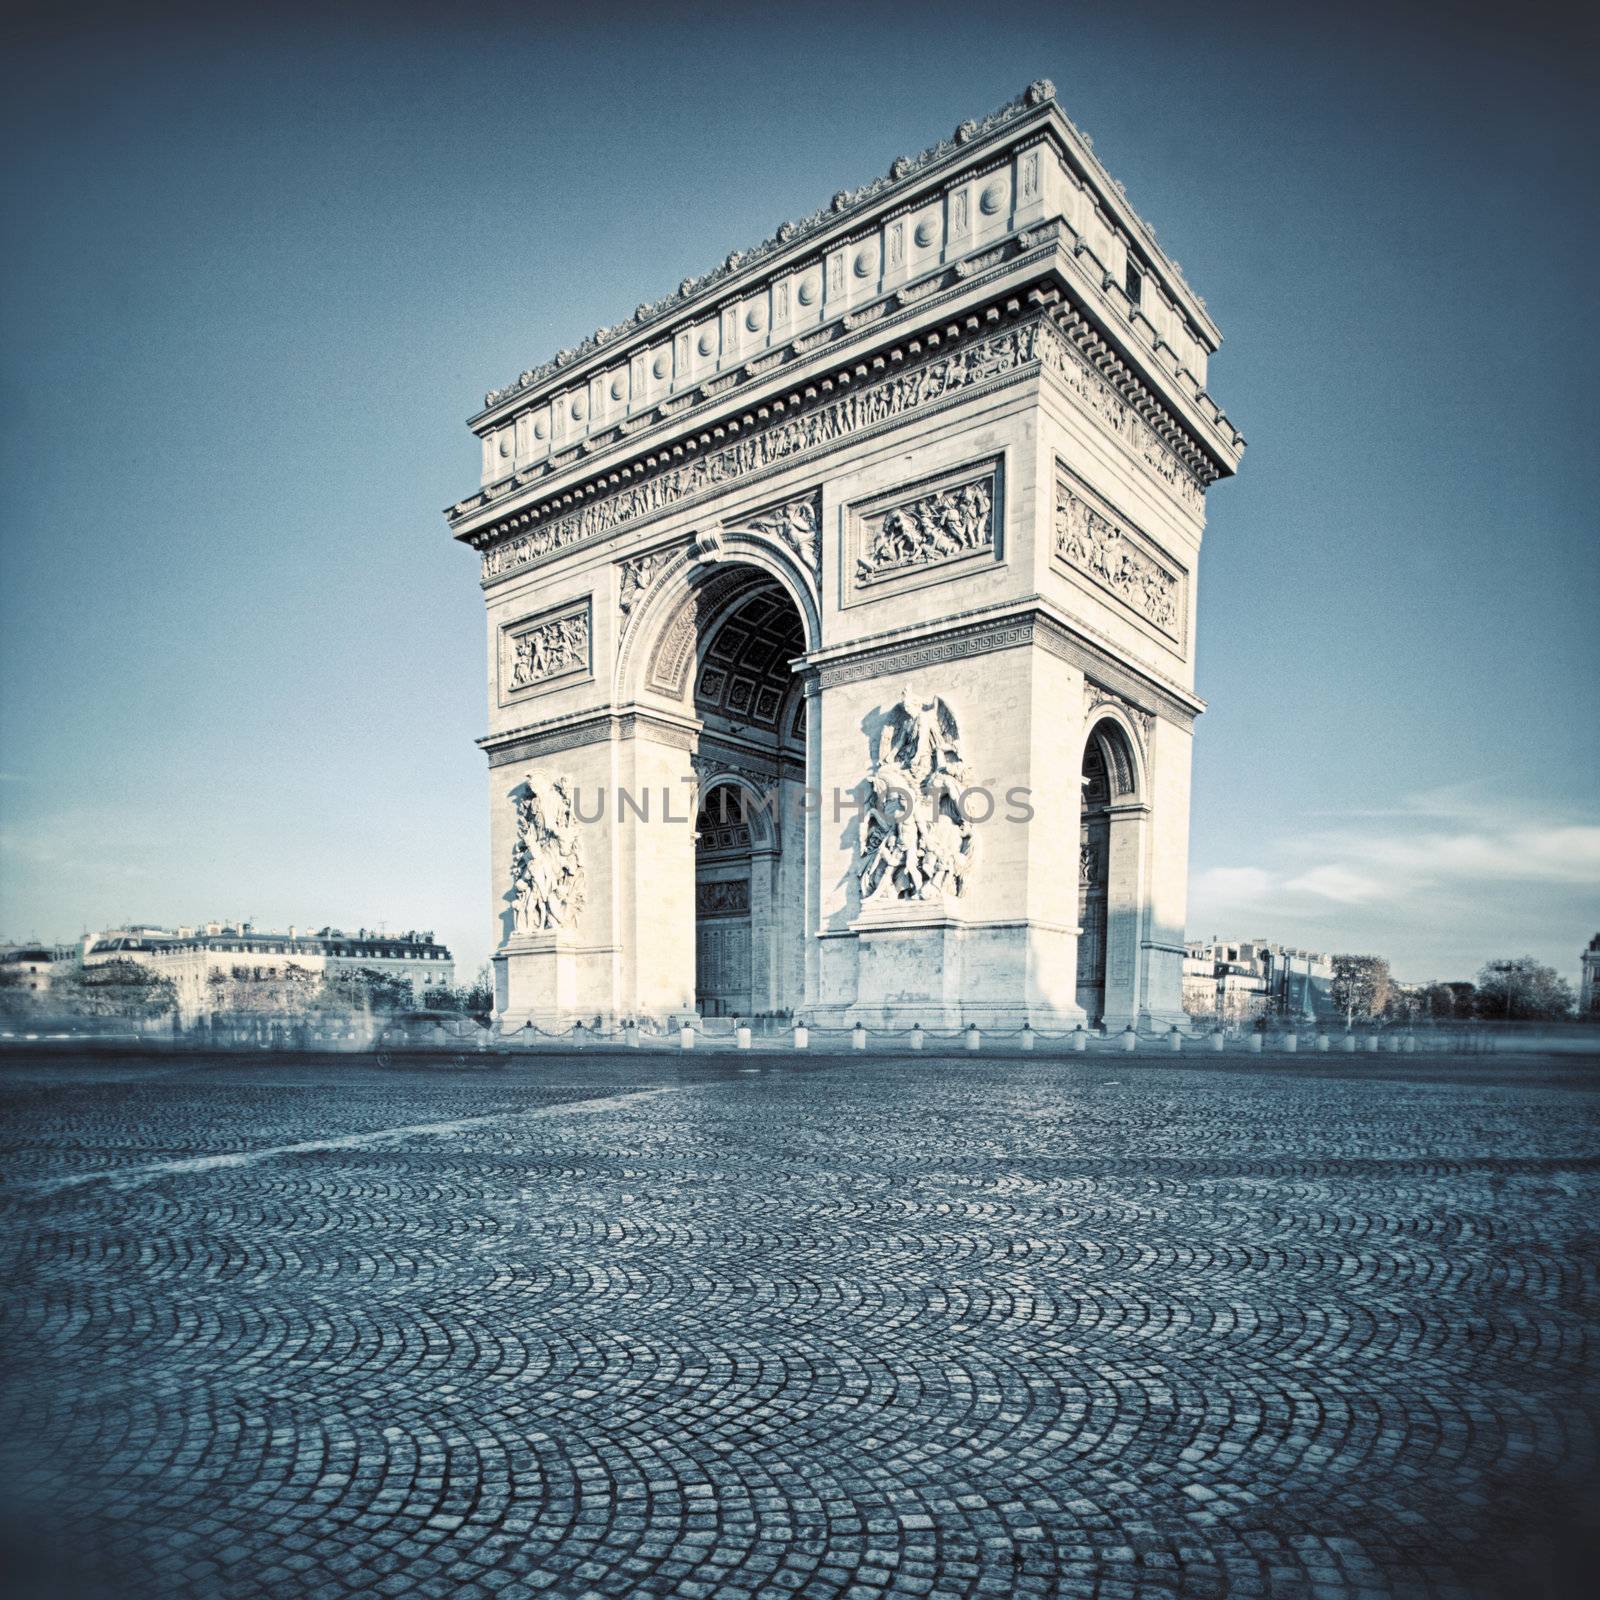 view of the Arc de Triomphe with special photographic processing